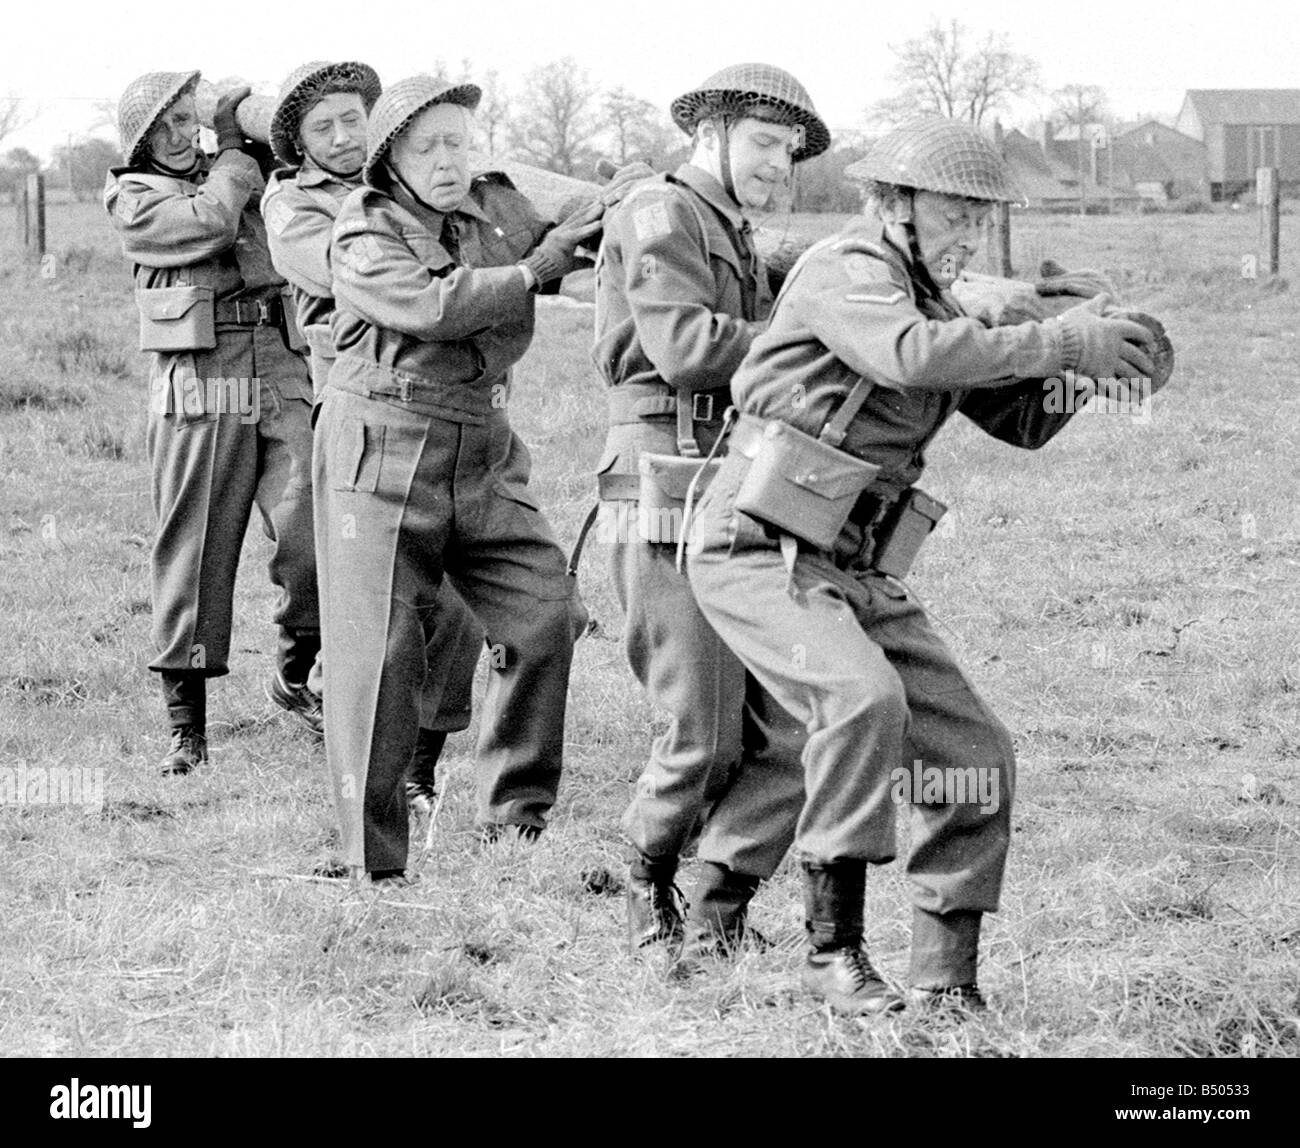 Dads Army ;Actor Clive Dunn who plays Corporal Jones Ian Lavender as pike ,Arnold Ridley as Godfrey, James Beck as Private Walker, John Laurie as Frasier in the BBC TV series Dads Army seen filming on location in Thetford Norfolk.;The cast were filming an assault course scene.;72 4866;©DM Stock Photo